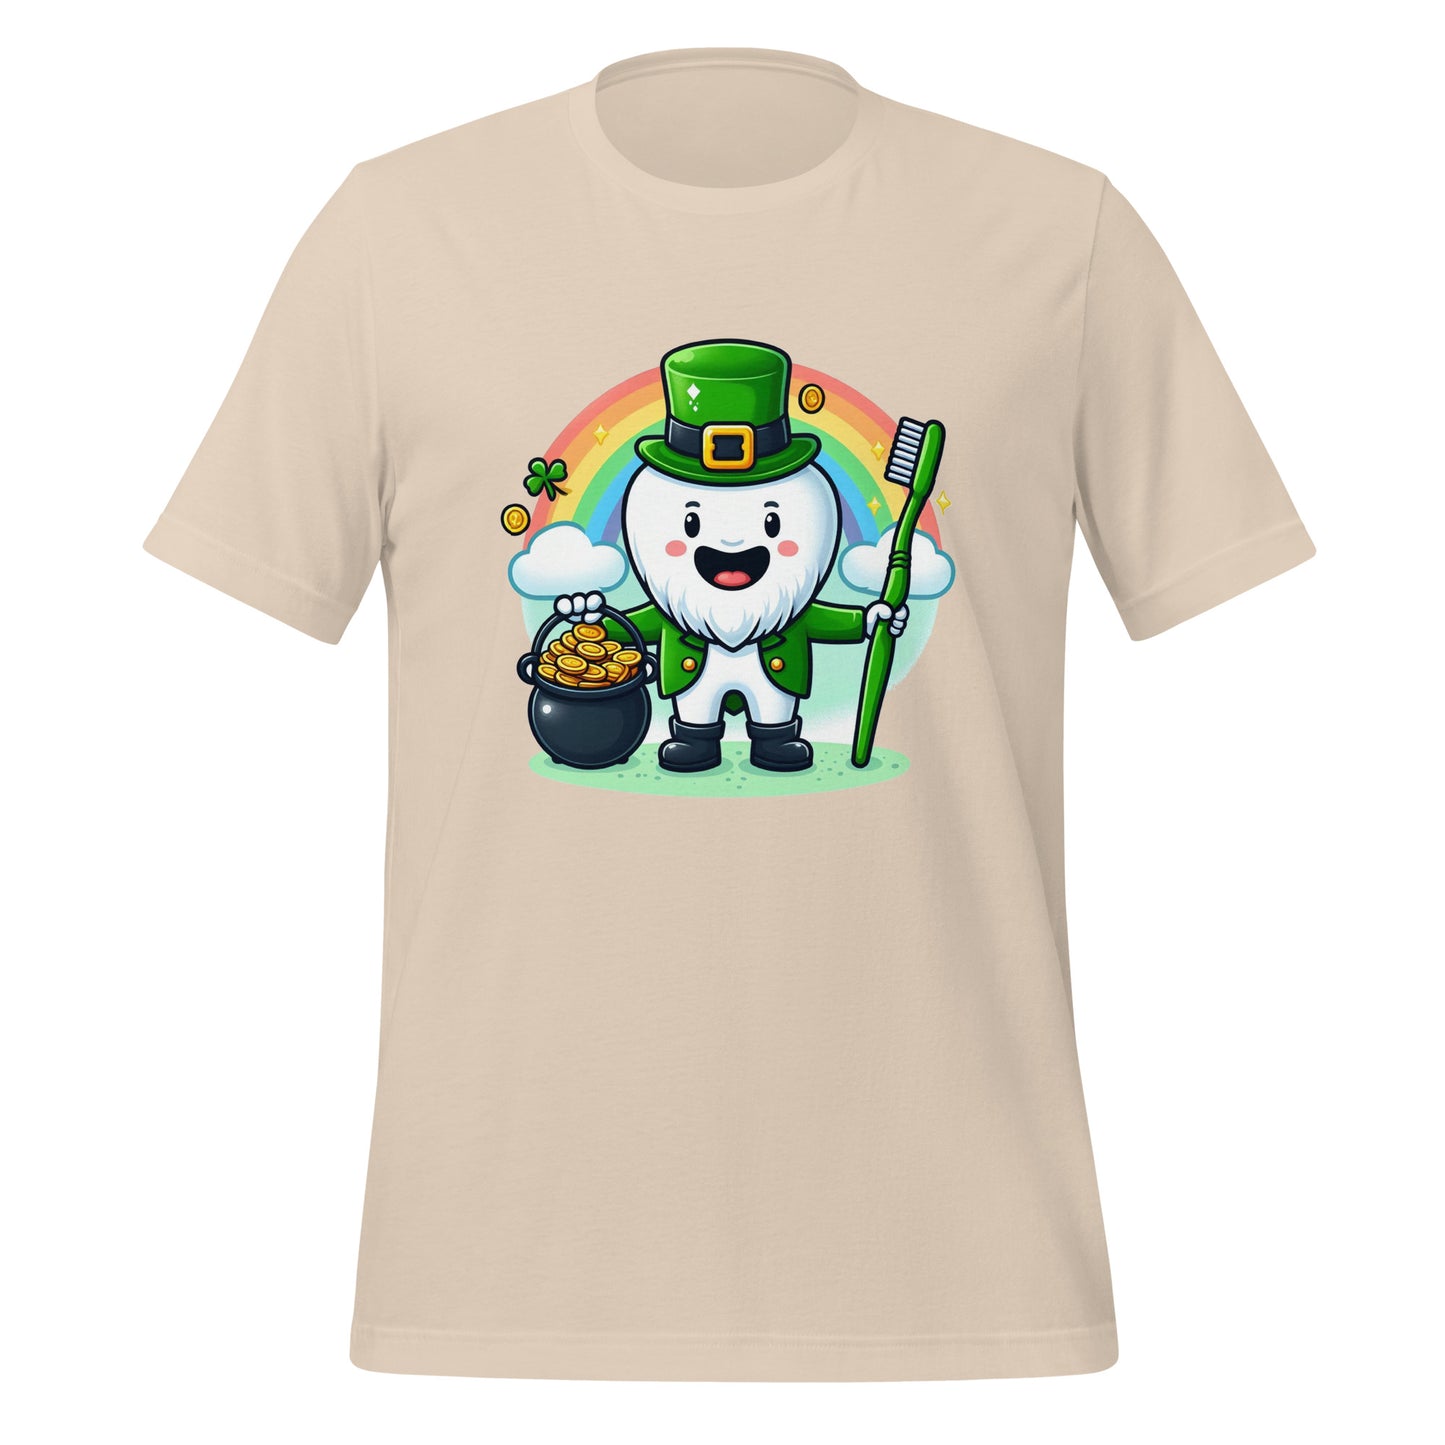 Leprechaun Tooth T-Shirt: A Fun, St. Patrick’s Day-Inspired Design for Dental Fan